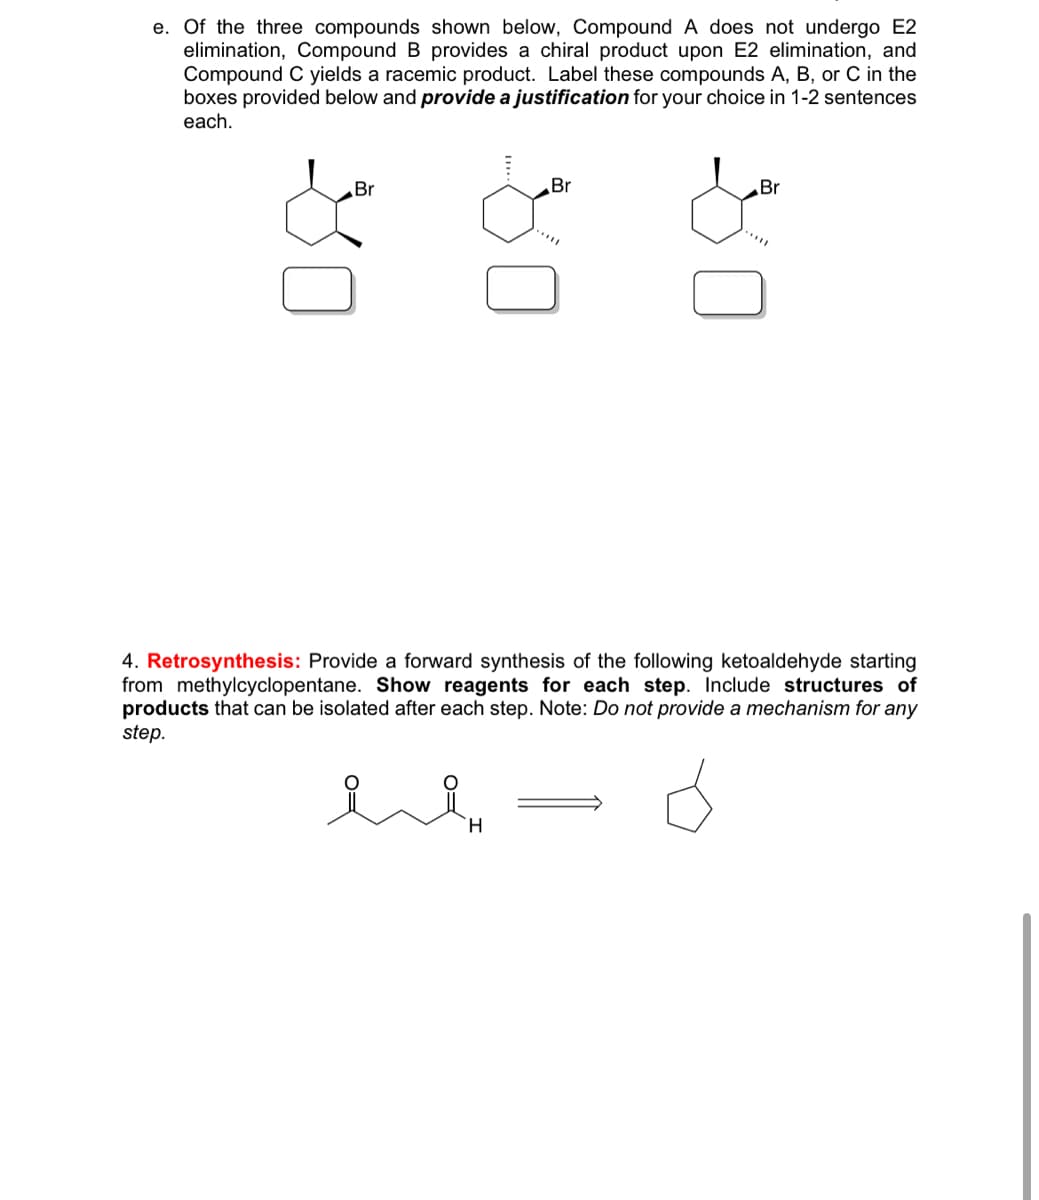 e. Of the three compounds shown below, Compound A does not undergo E2
elimination, Compound B provides a chiral product upon E2 elimination, and
Compound C yields a racemic product. Label these compounds A, B, or C in the
boxes provided below and provide a justification for your choice in 1-2 sentences
each.
Br
Br
Br
4. Retrosynthesis: Provide a forward synthesis of the following ketoaldehyde starting
from methylcyclopentane. Show reagents for each step. Include structures of
products that can be isolated after each step. Note: Do not provide a mechanism for any
step.
H